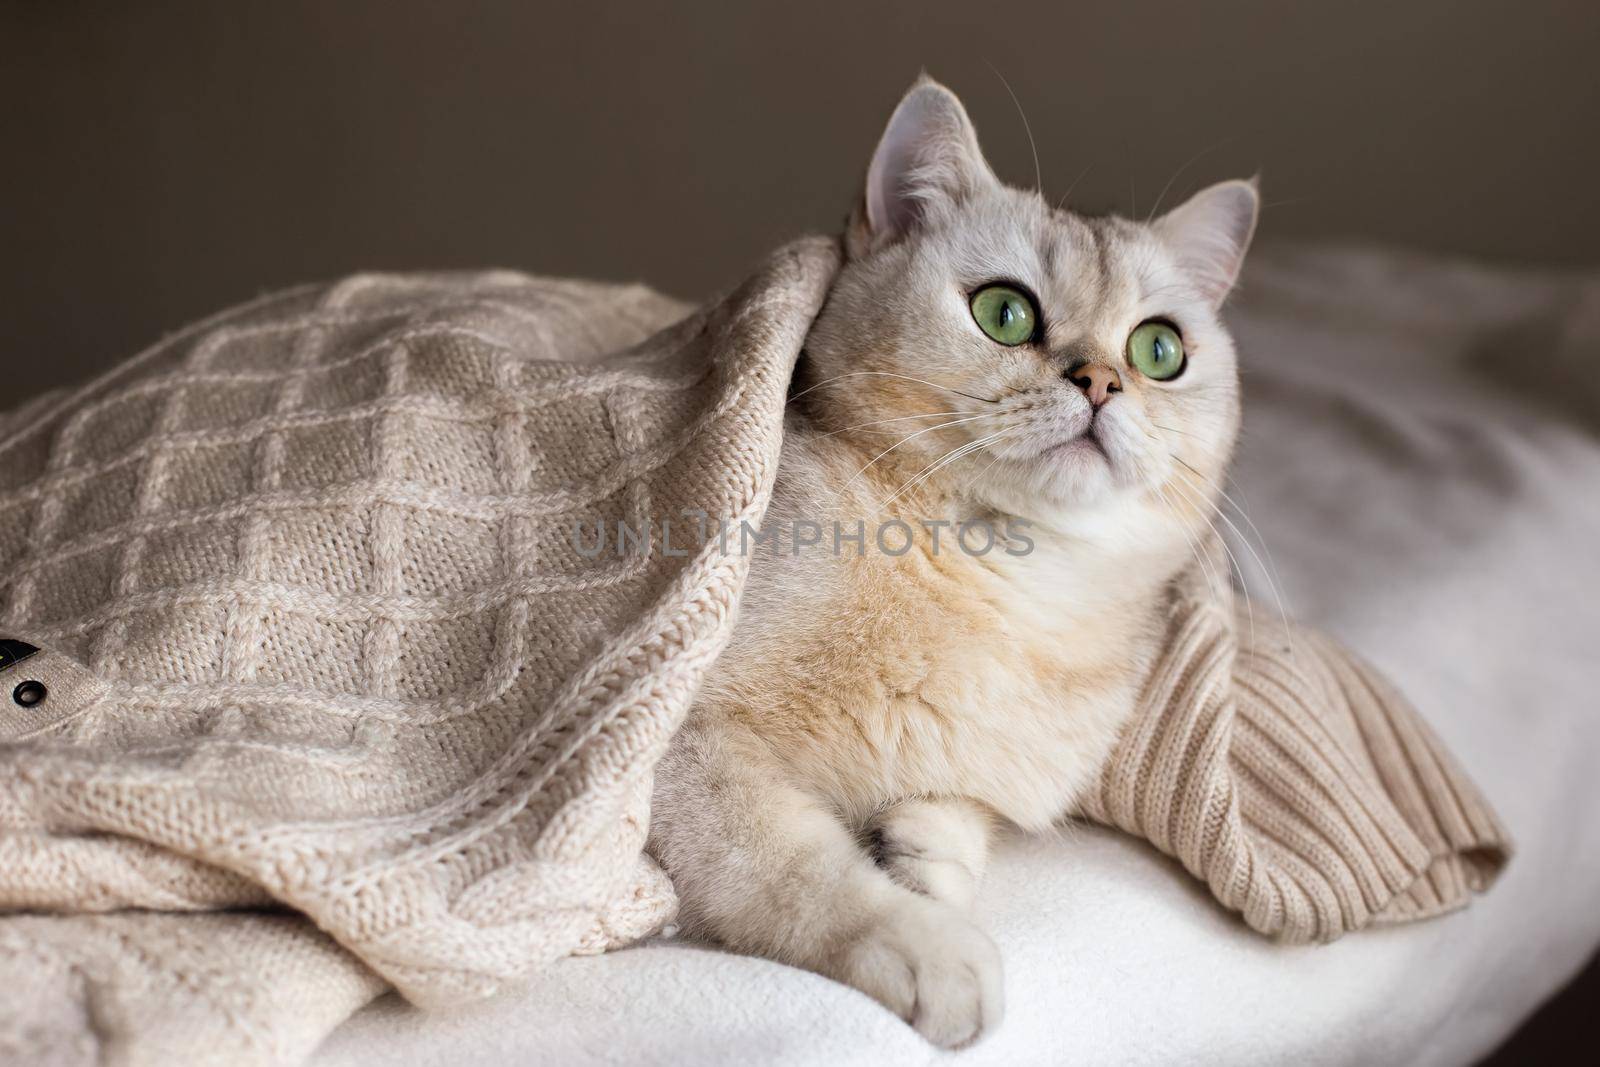 Adorable portrait of a white cat lies on a white bed under a white knitted blanket.